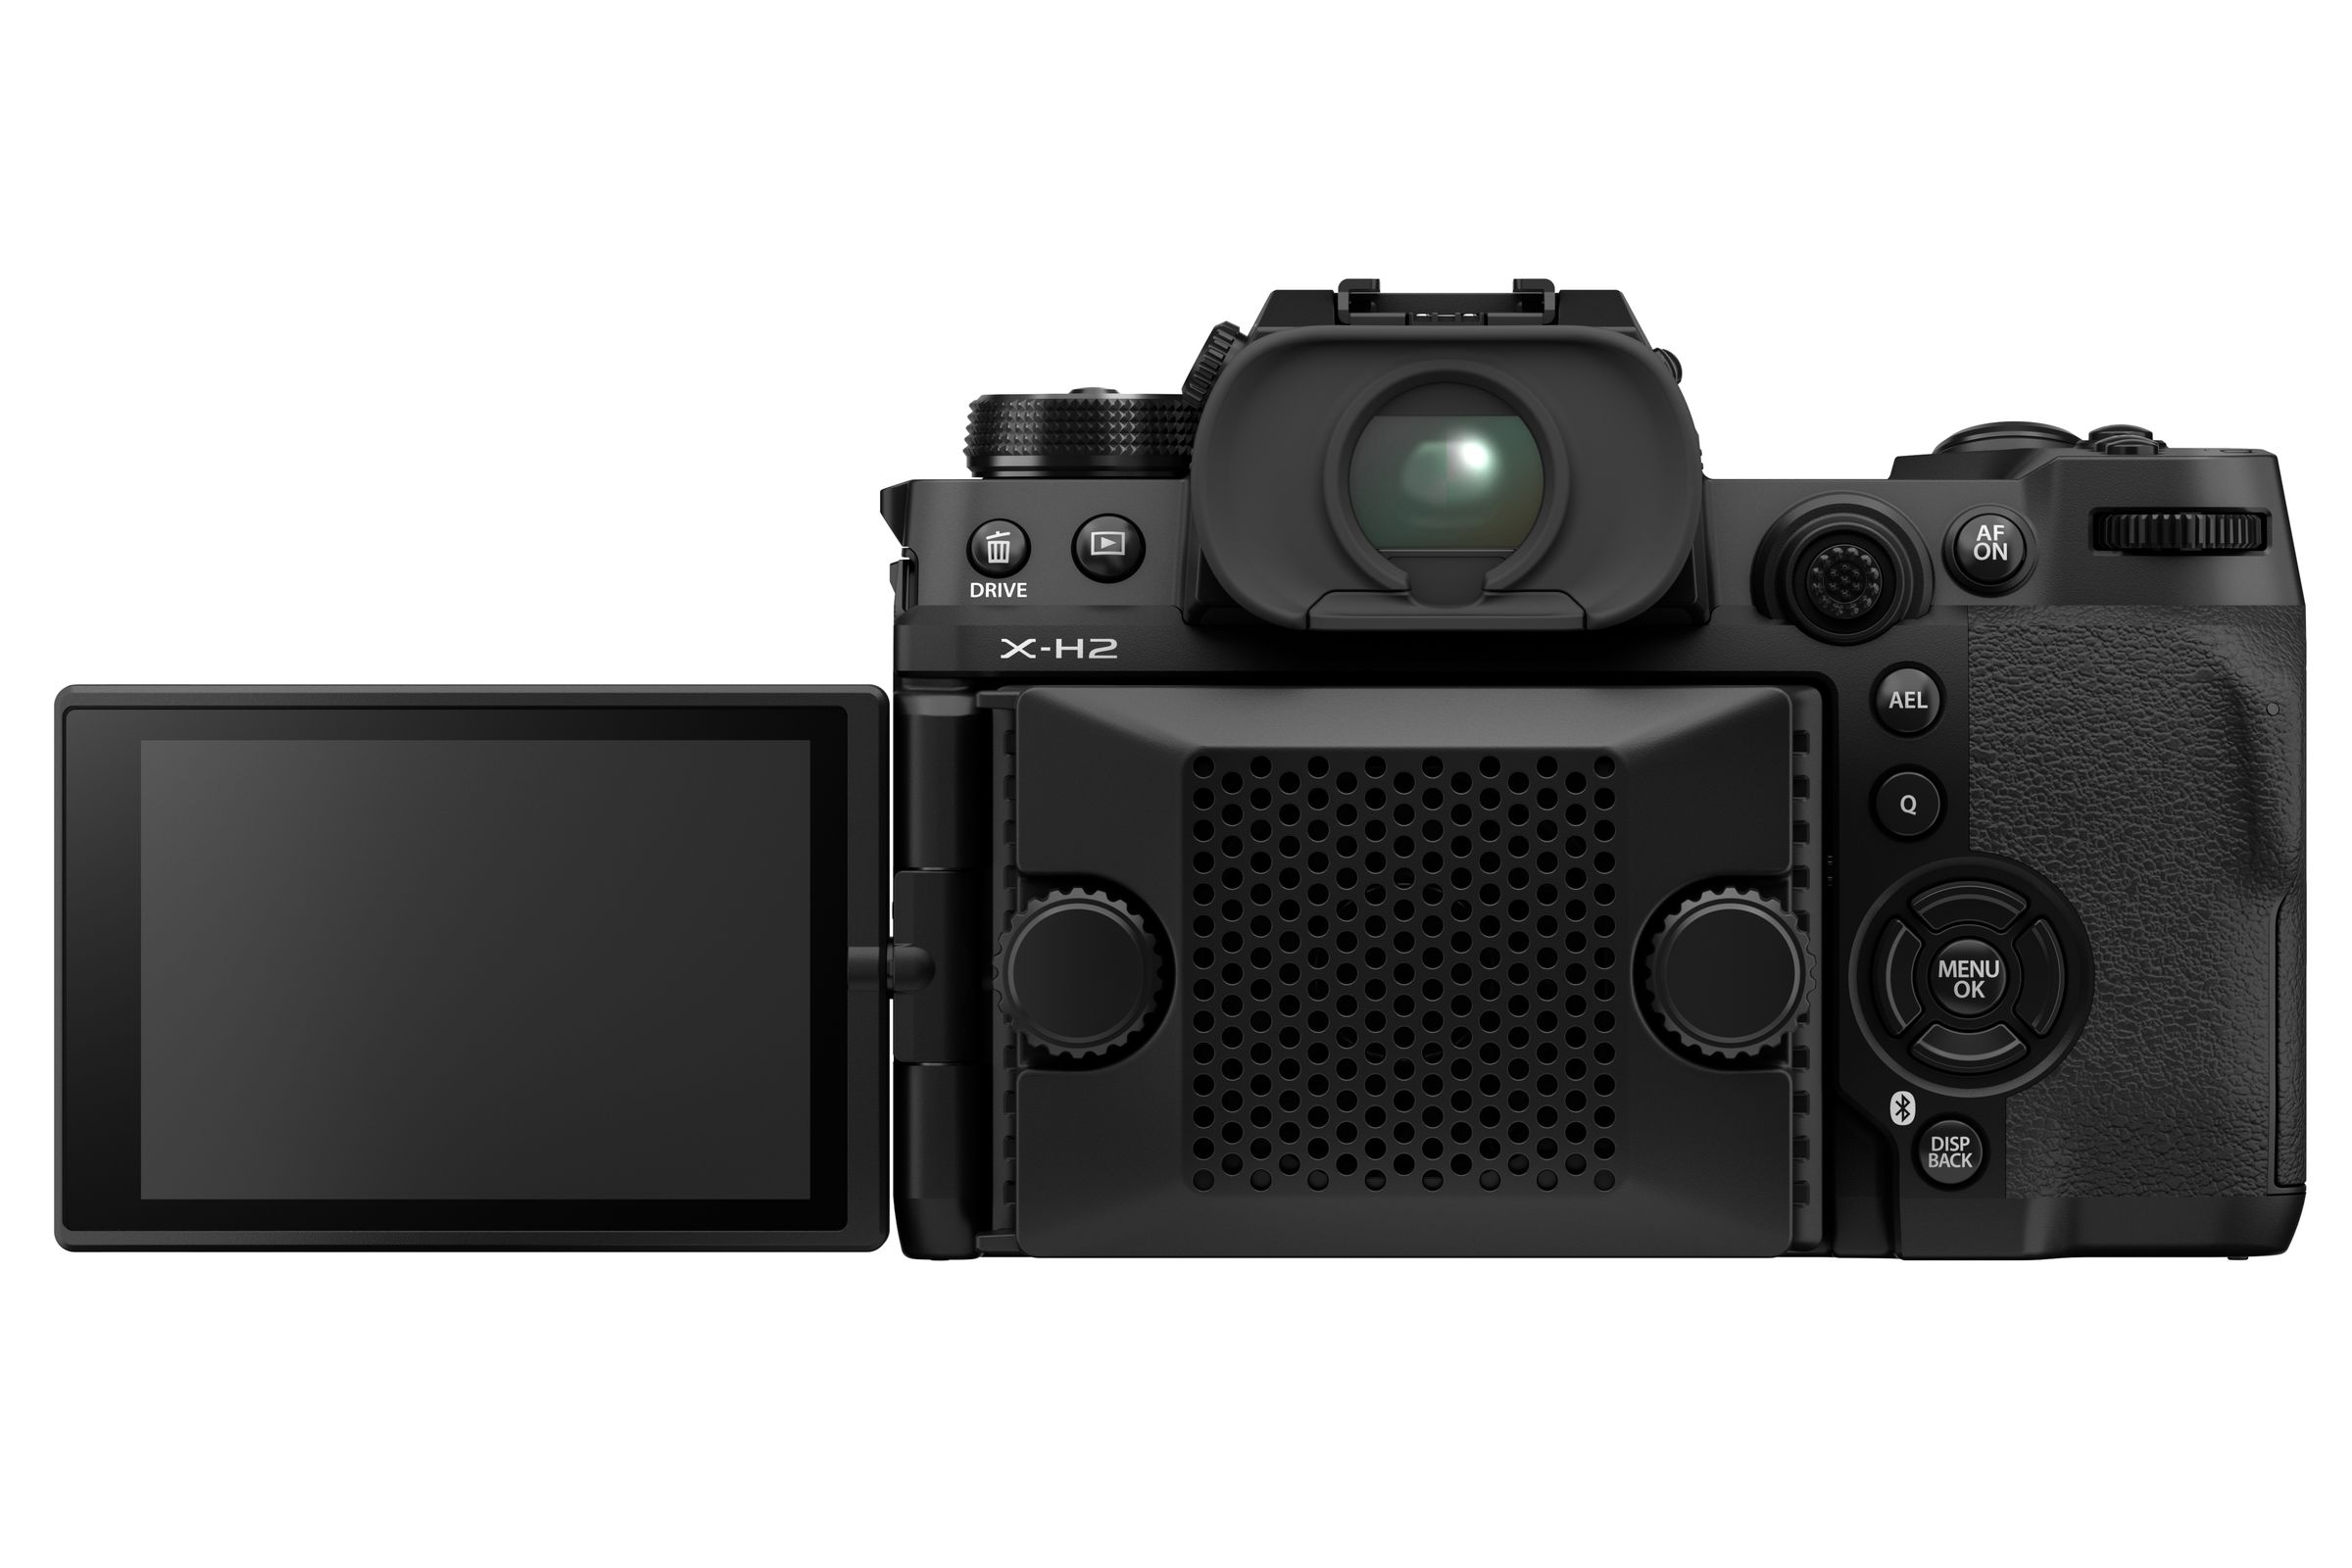 The X-H2 also uses the same $199.99 add-on cooling fan as the X-H2S for longer video recording times. Both cameras can use the previously announced $999.99 FT-XH File Transmitter grip, which ships in late October.